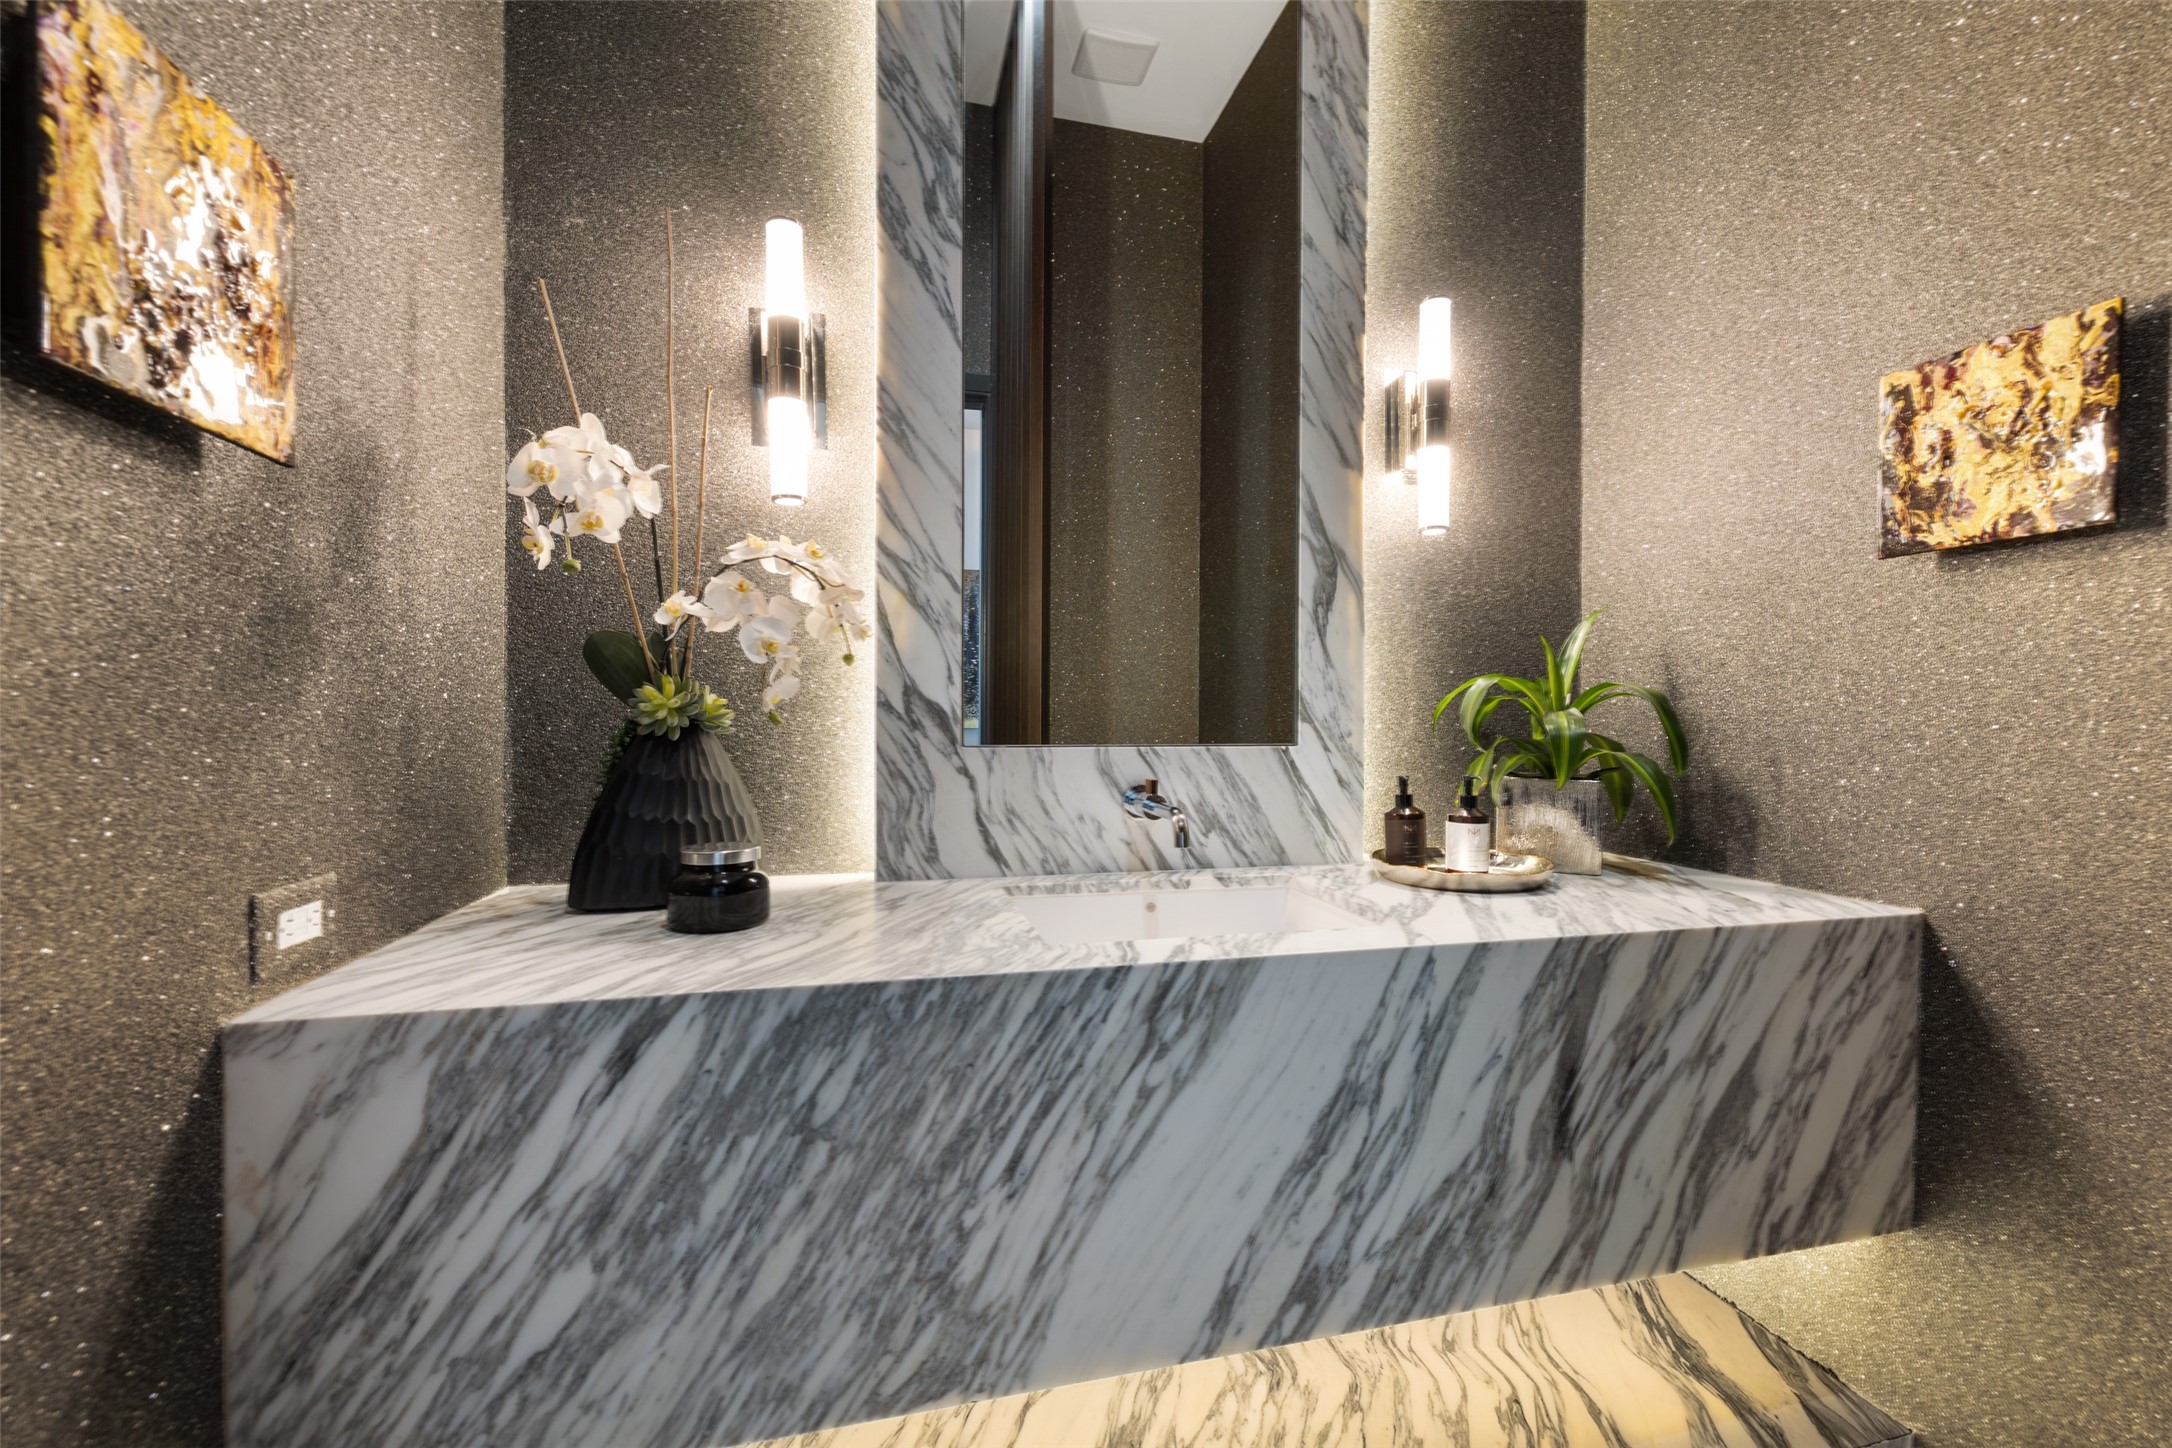 The powder bath is magazine cover worthy from the walls to the marble block counter to the designer lighting.